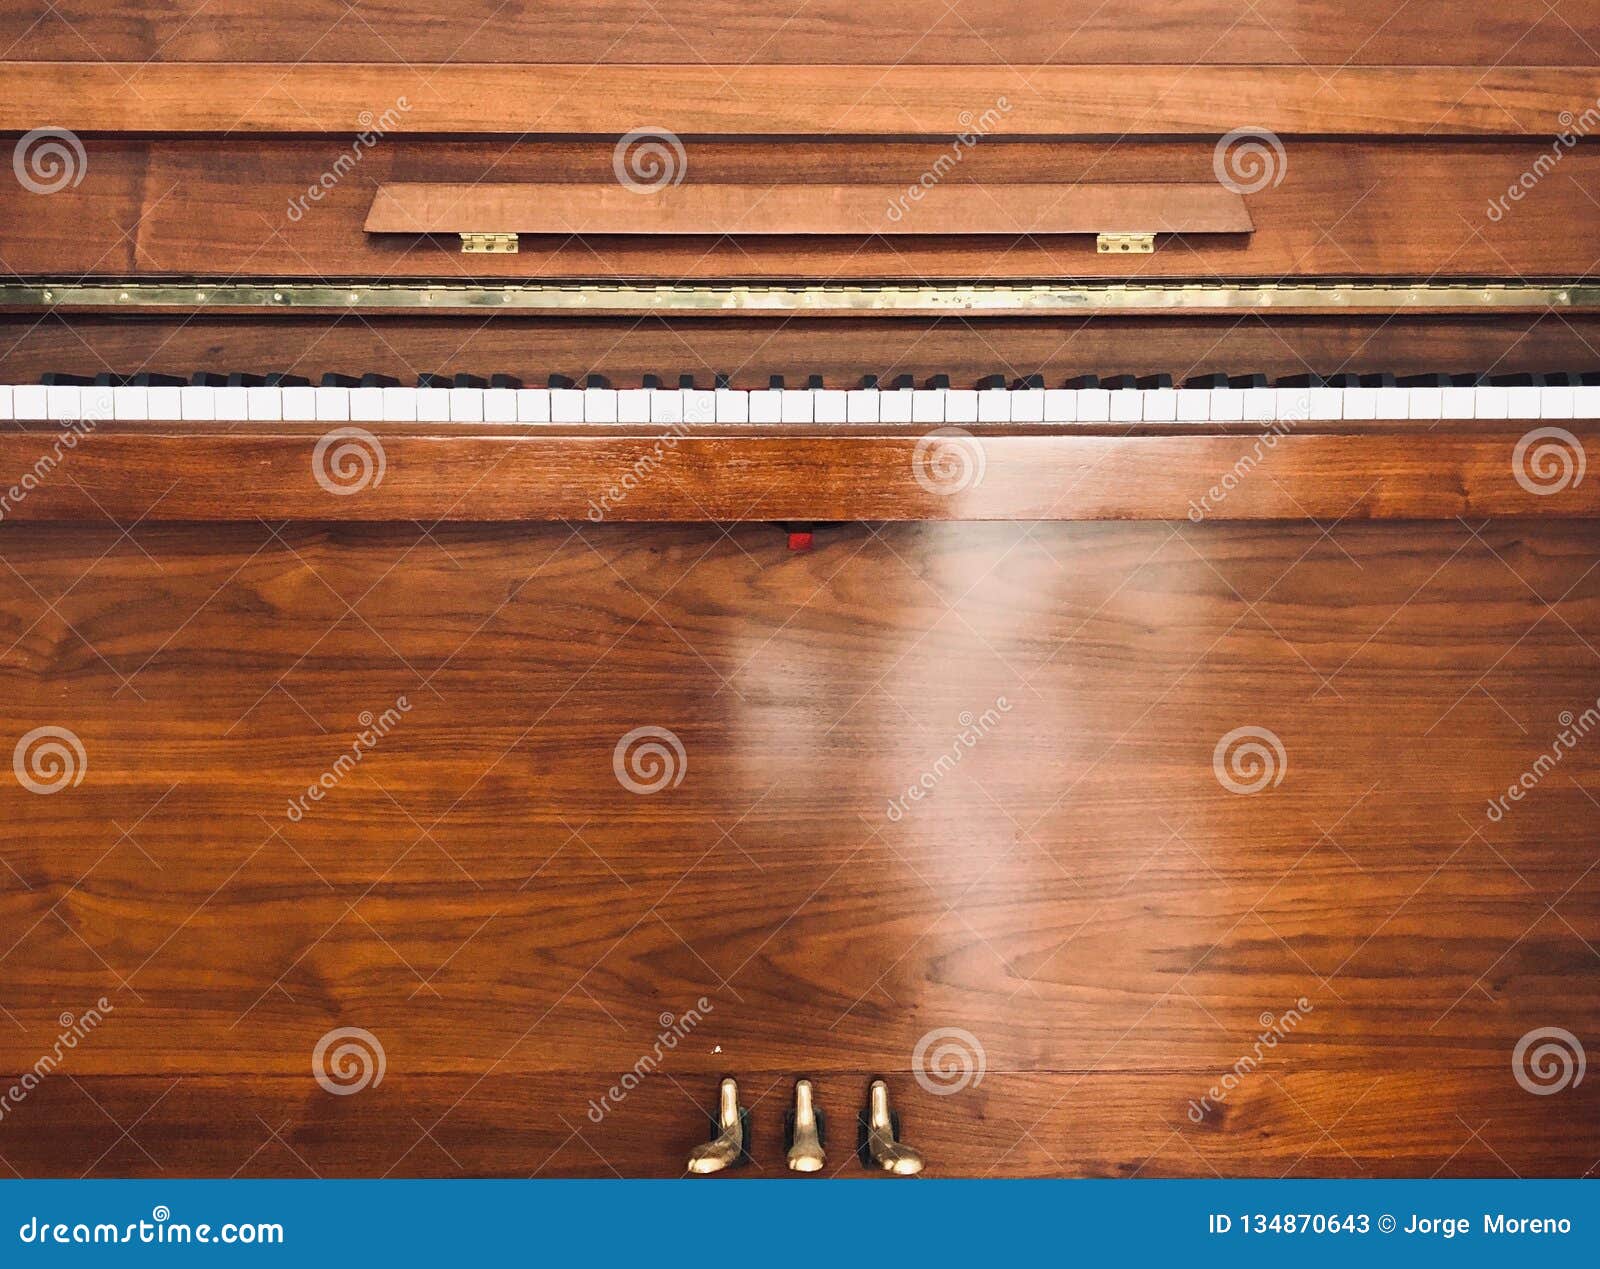 front of a wooden piano.